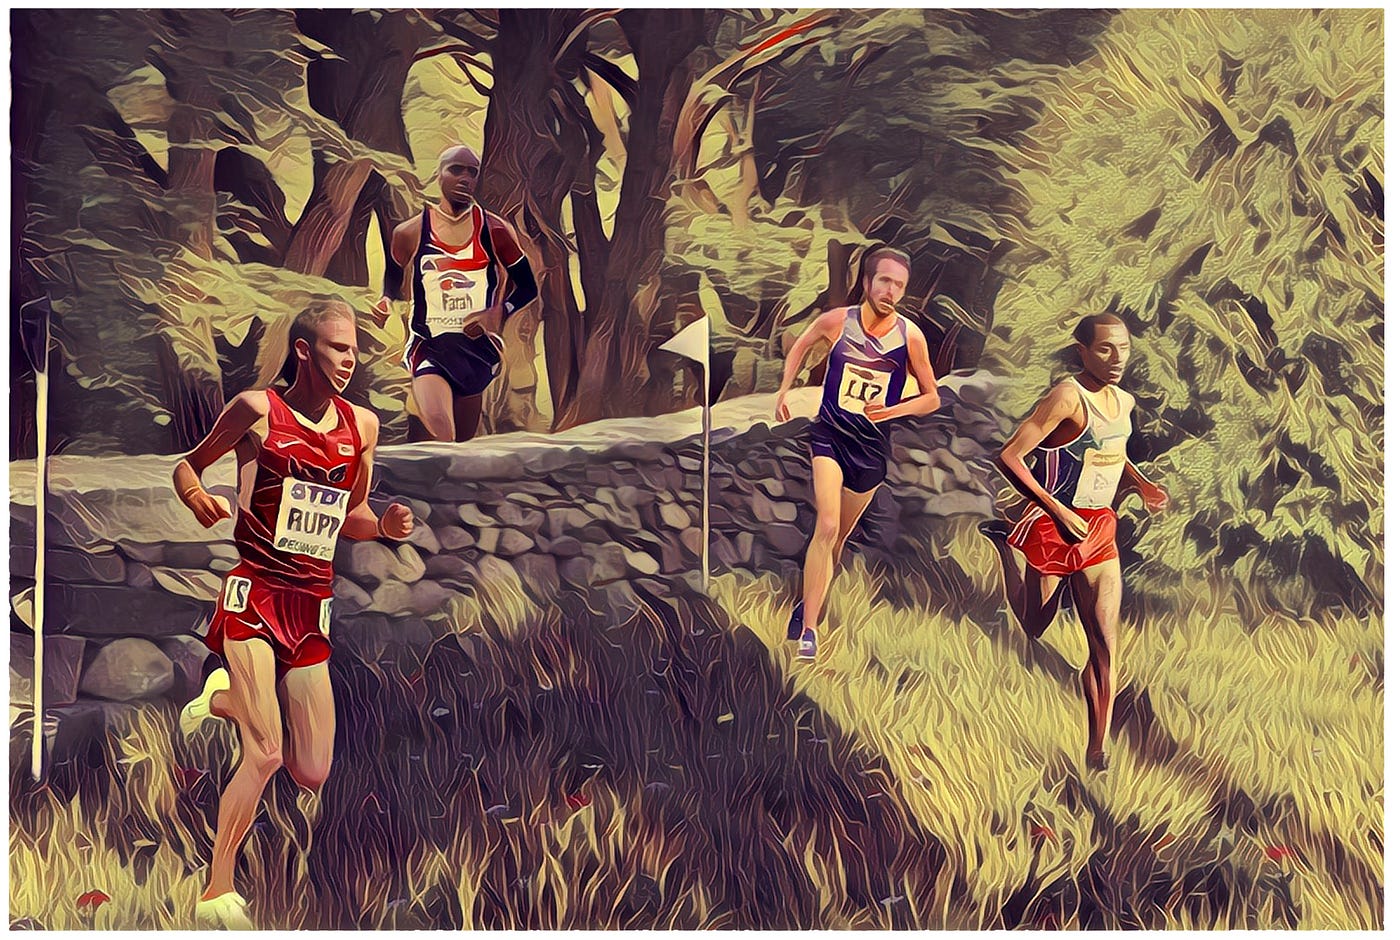 Sports Series: The evolution of cross country running